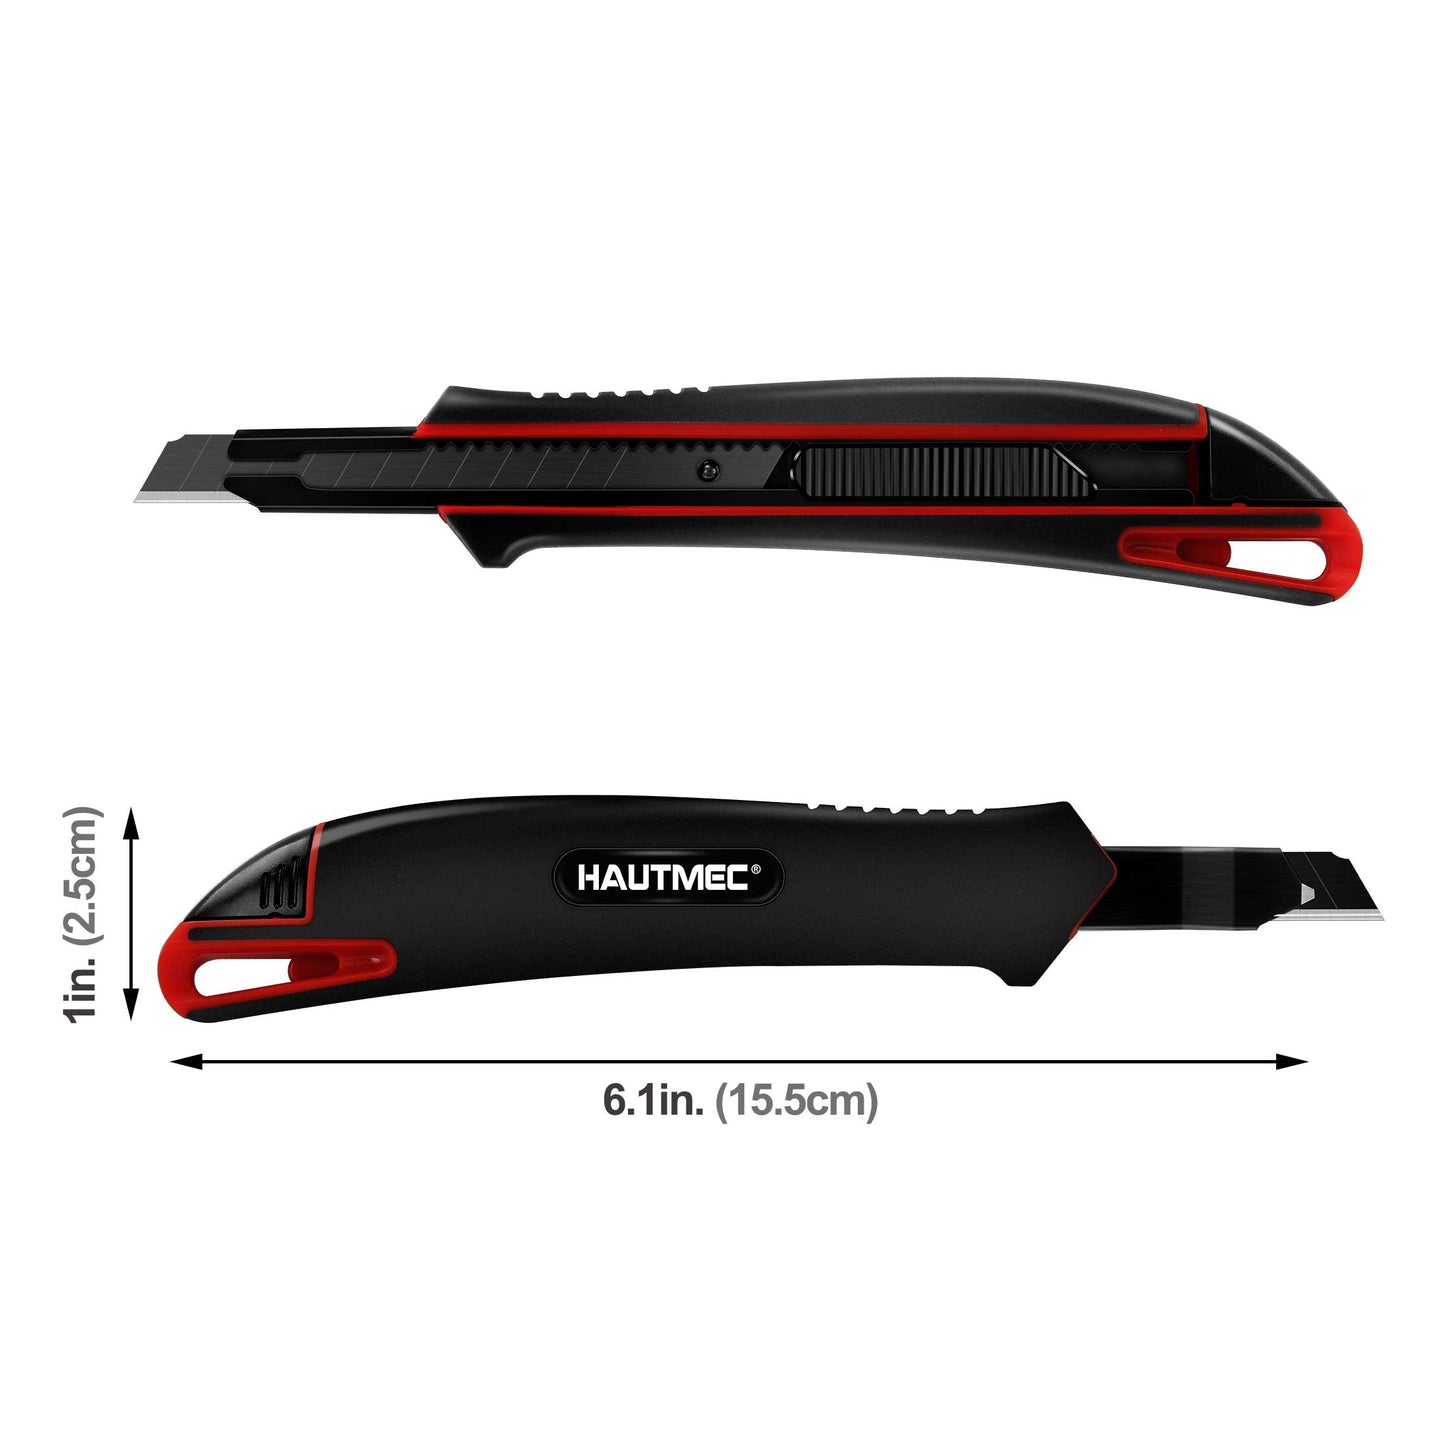 HAUTMEC 9mm Precision Utility Knife, Soft Grip Snap-off Box Cutter, Retractable 9mm Multi-Purpose Cutter for Detailed Cutting in Work, Home Use and Arts Crafts HT0255-KN